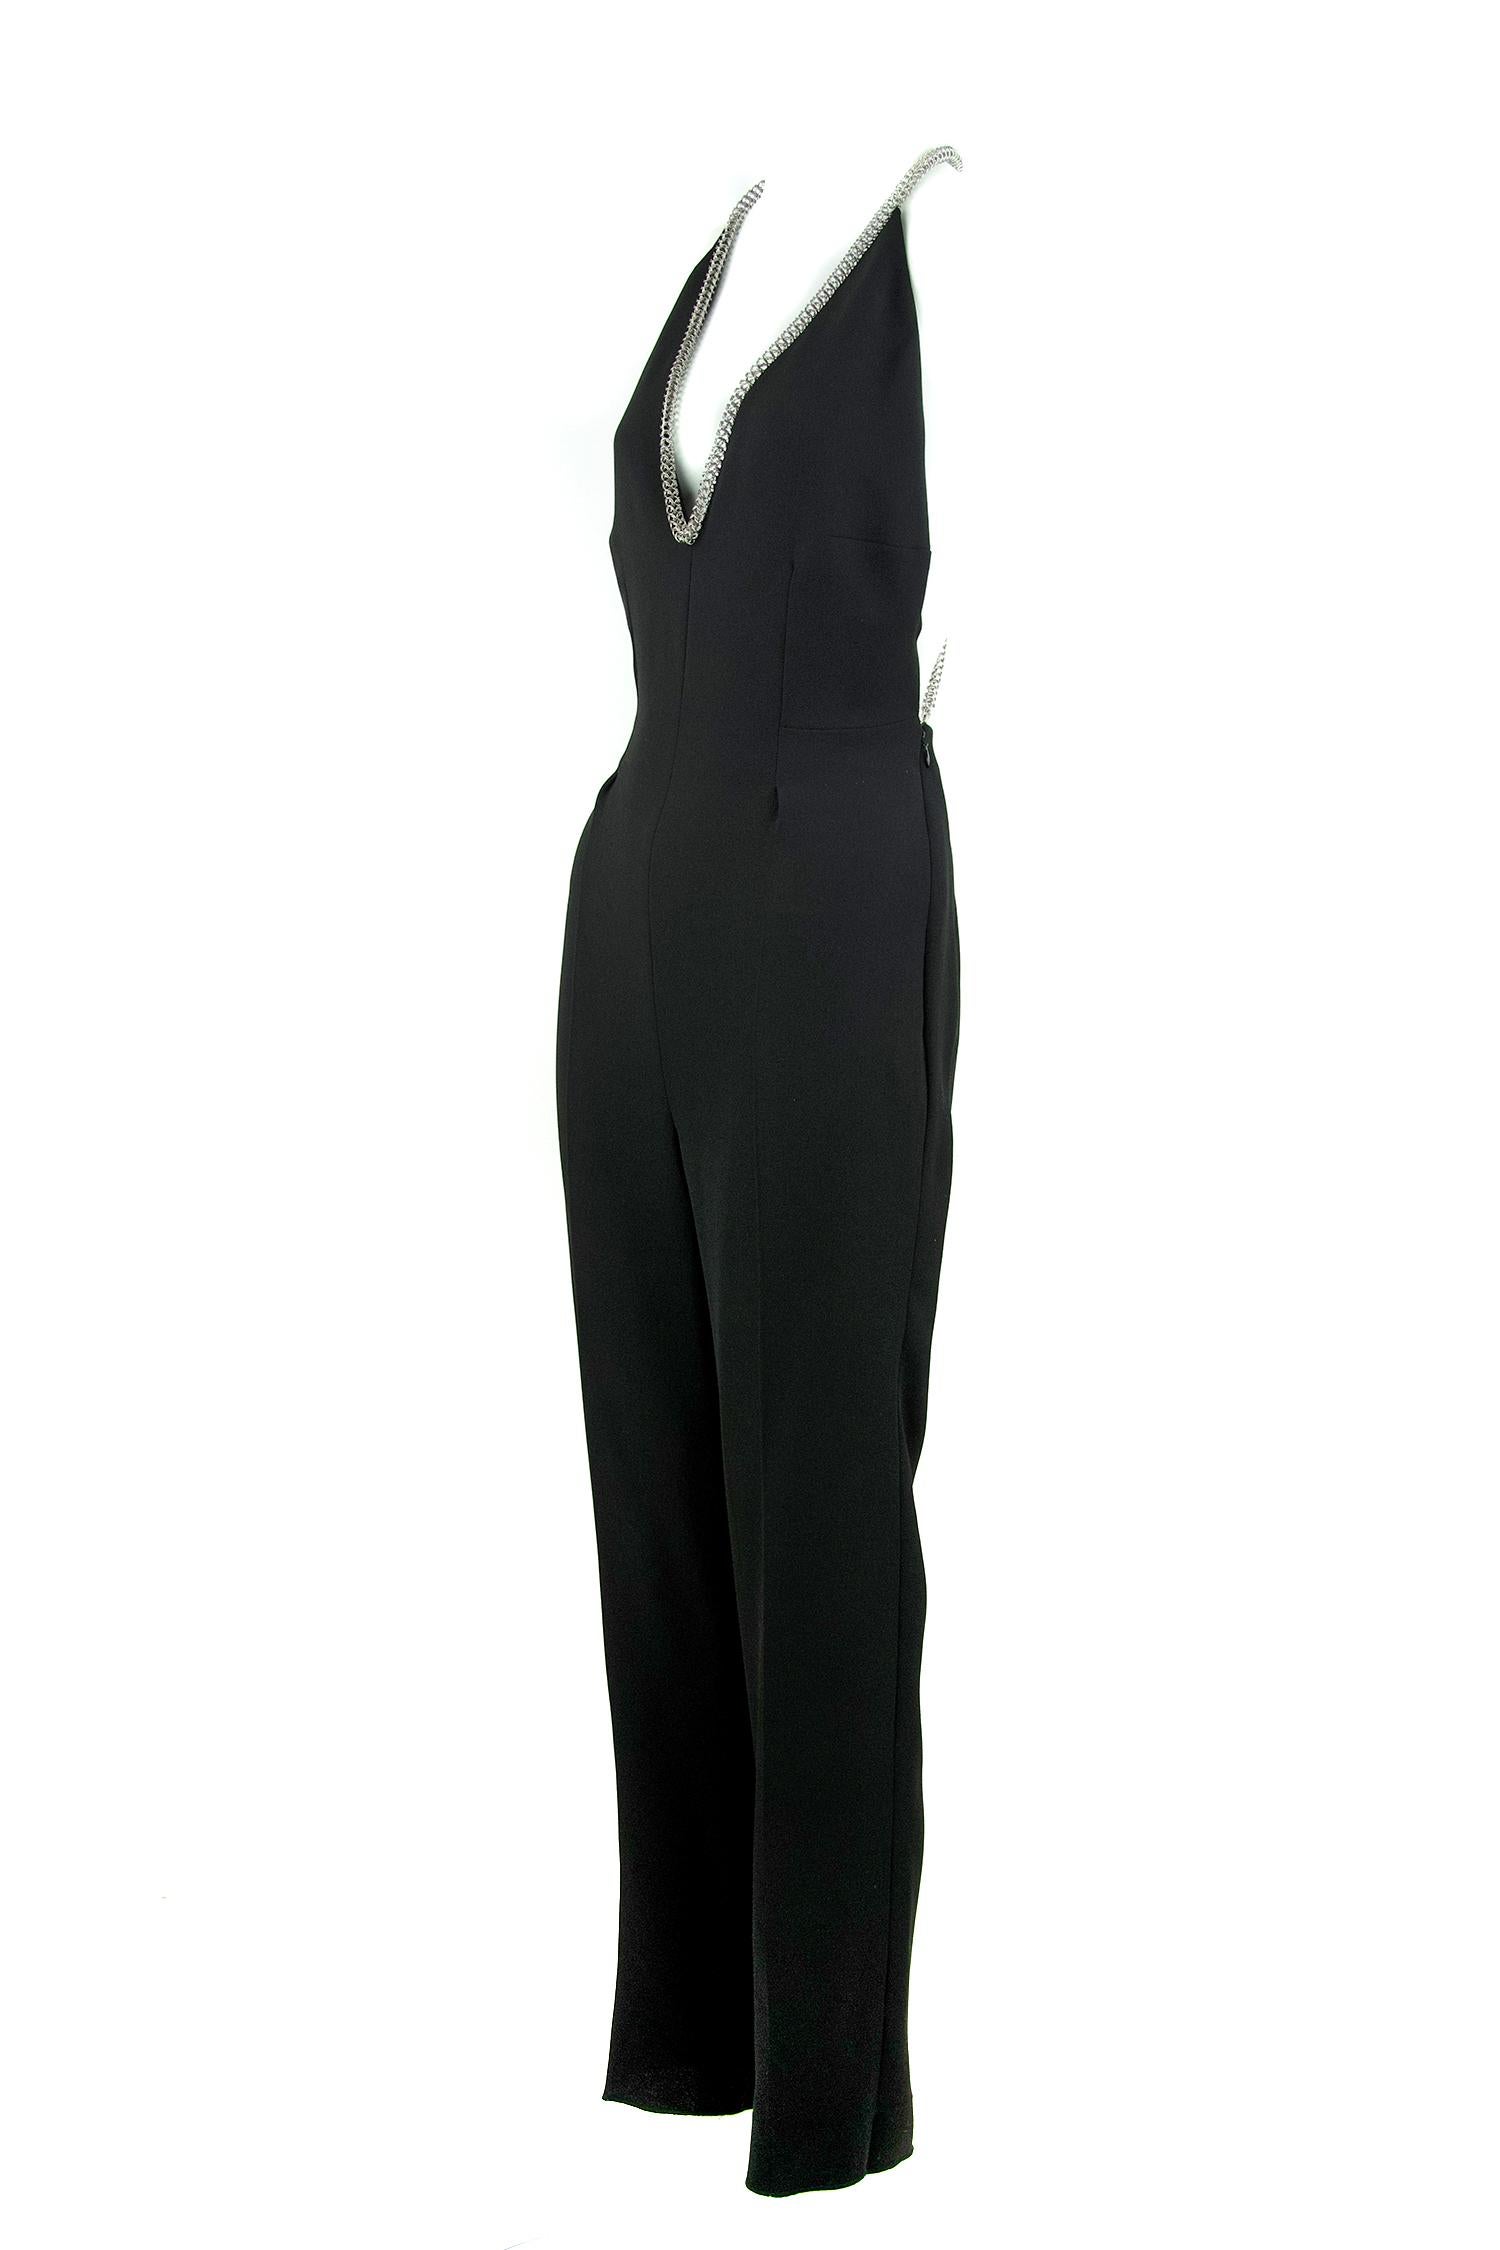 Classic YSL black jumpsuit with sexy open back and low v-neck in the front.  The top is finished with an silver chain, giving this piece a slightly edgy feel.

Size: FR 38

Condition: Pristine

Composition: 100% silk

Care: Dry clean only

Made in